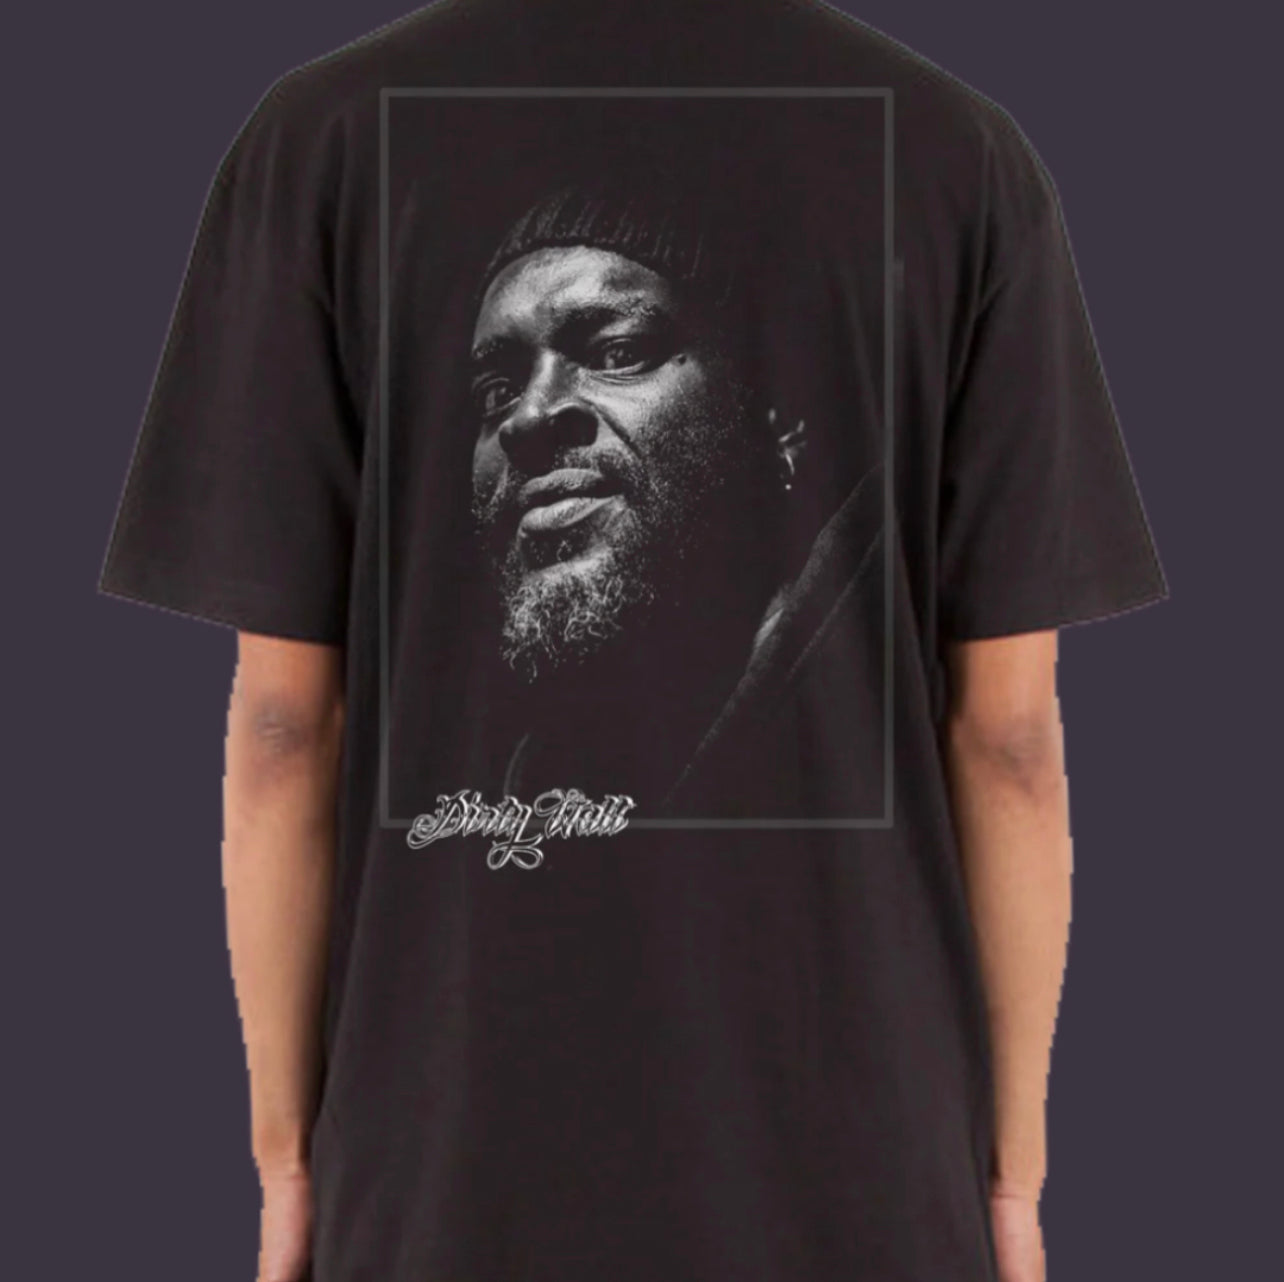 Limited Edition -OG Dirty Walt - Double Sided Exclusive - Low Item Alert!